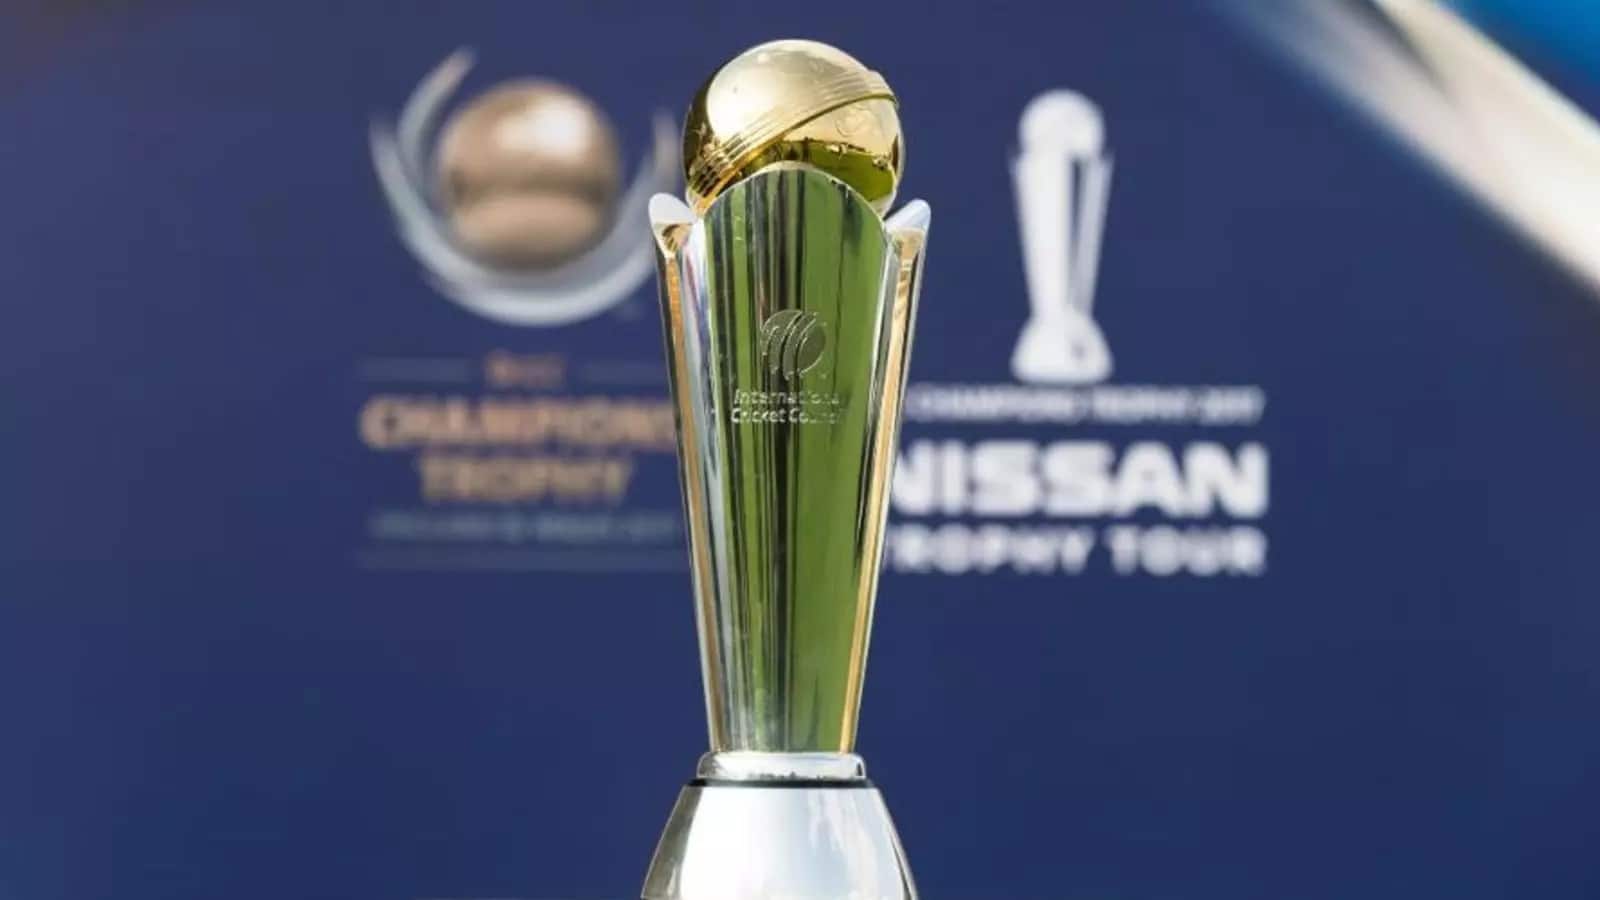 Will Pakistan Lose The Right To Host The 2025 Champions Trophy? Check The Full Report